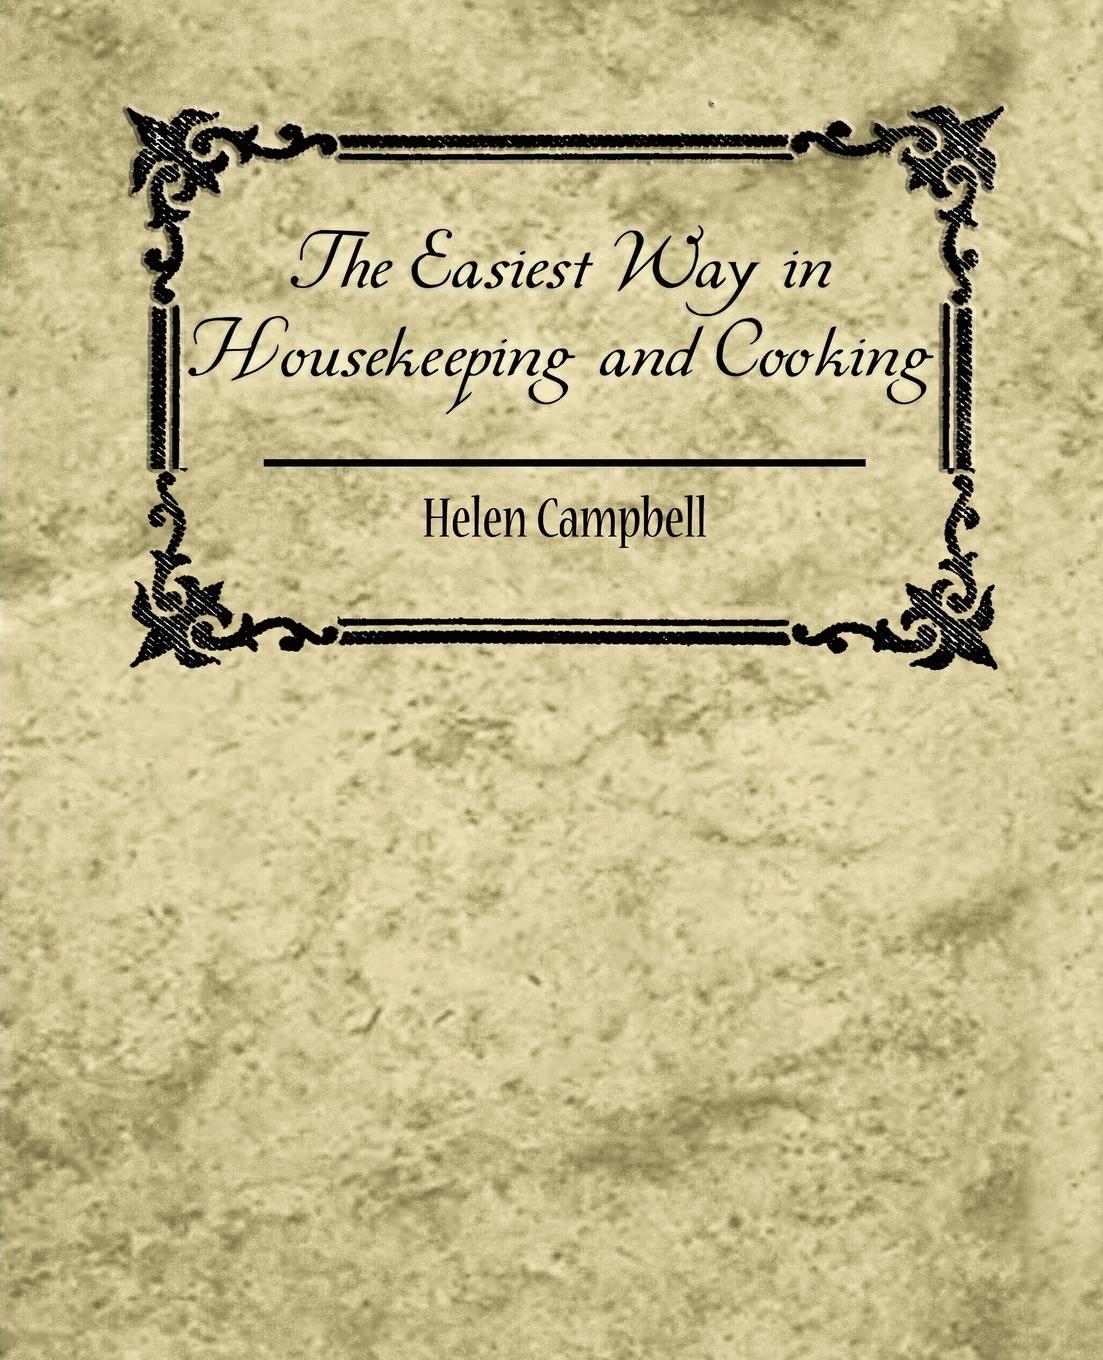 The Easiest Way in Housekeeping and Cooking - Helen Campbell, Campbell Helen Campbell